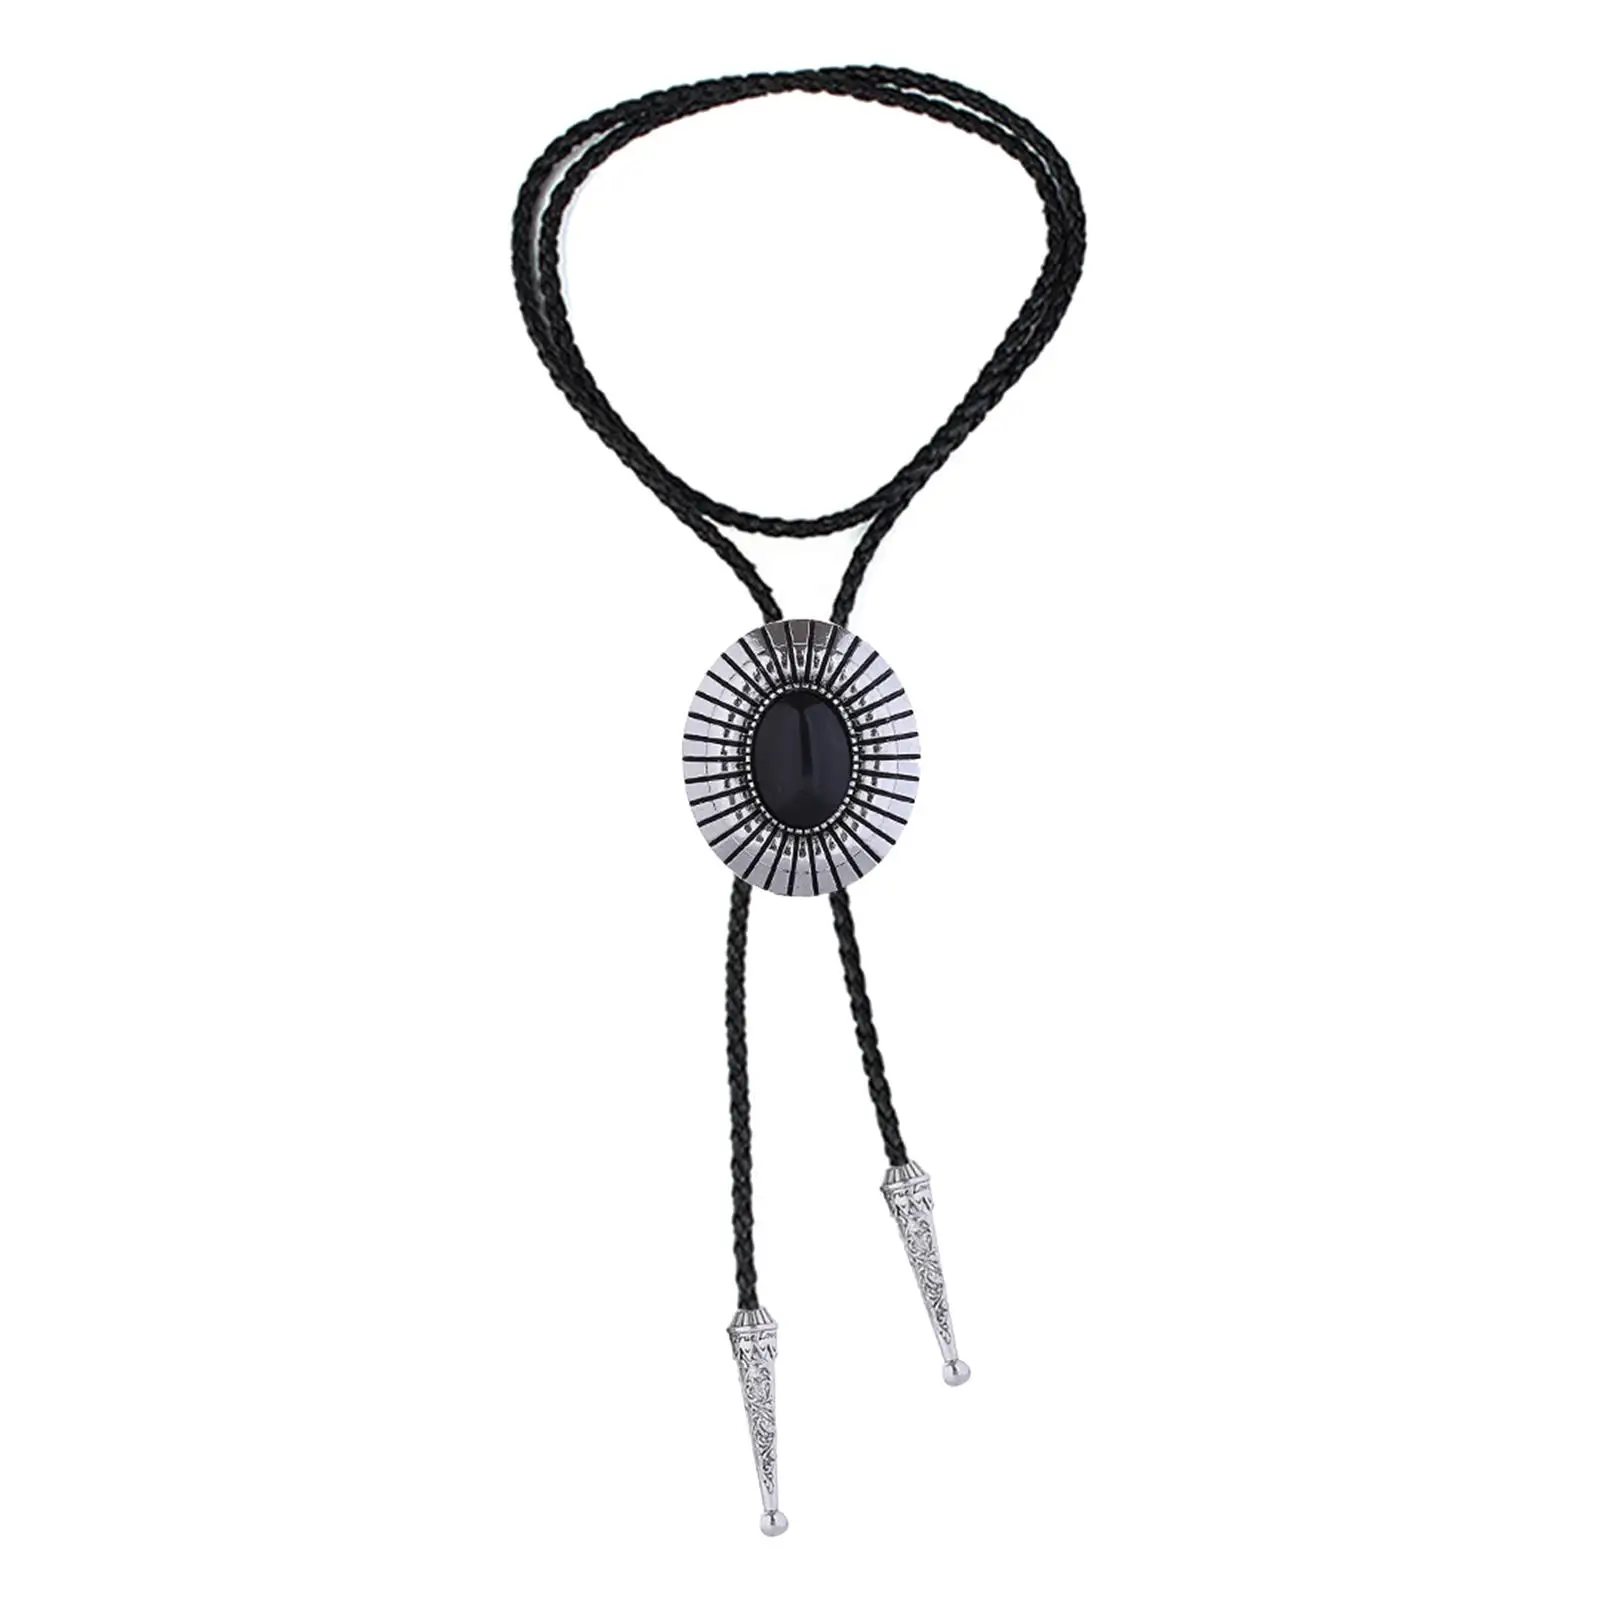 Bolo Tie Necktie Costume American PU Leather Necklace for Birthday Men